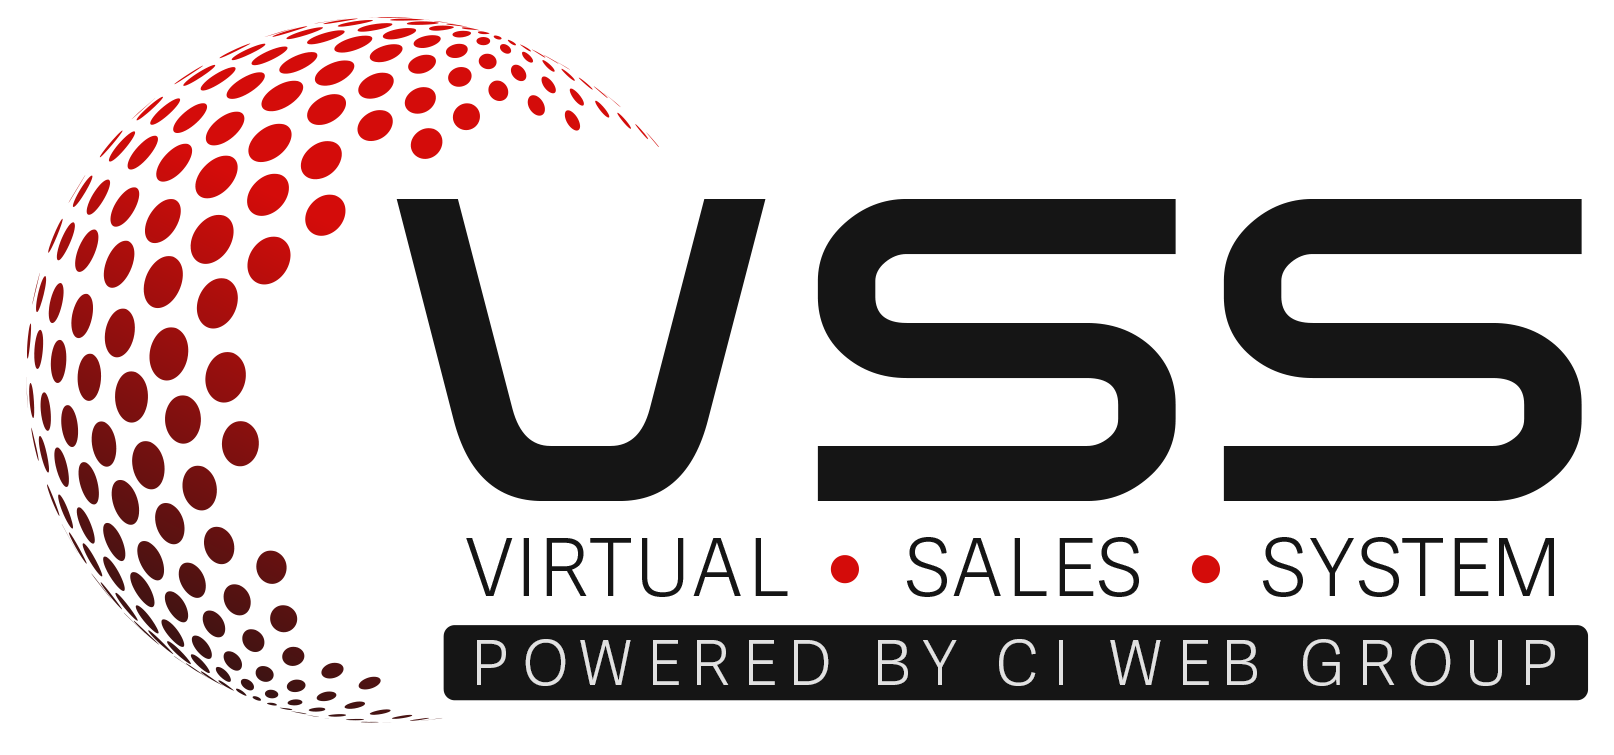 VSS | Virtual Sales and Service System